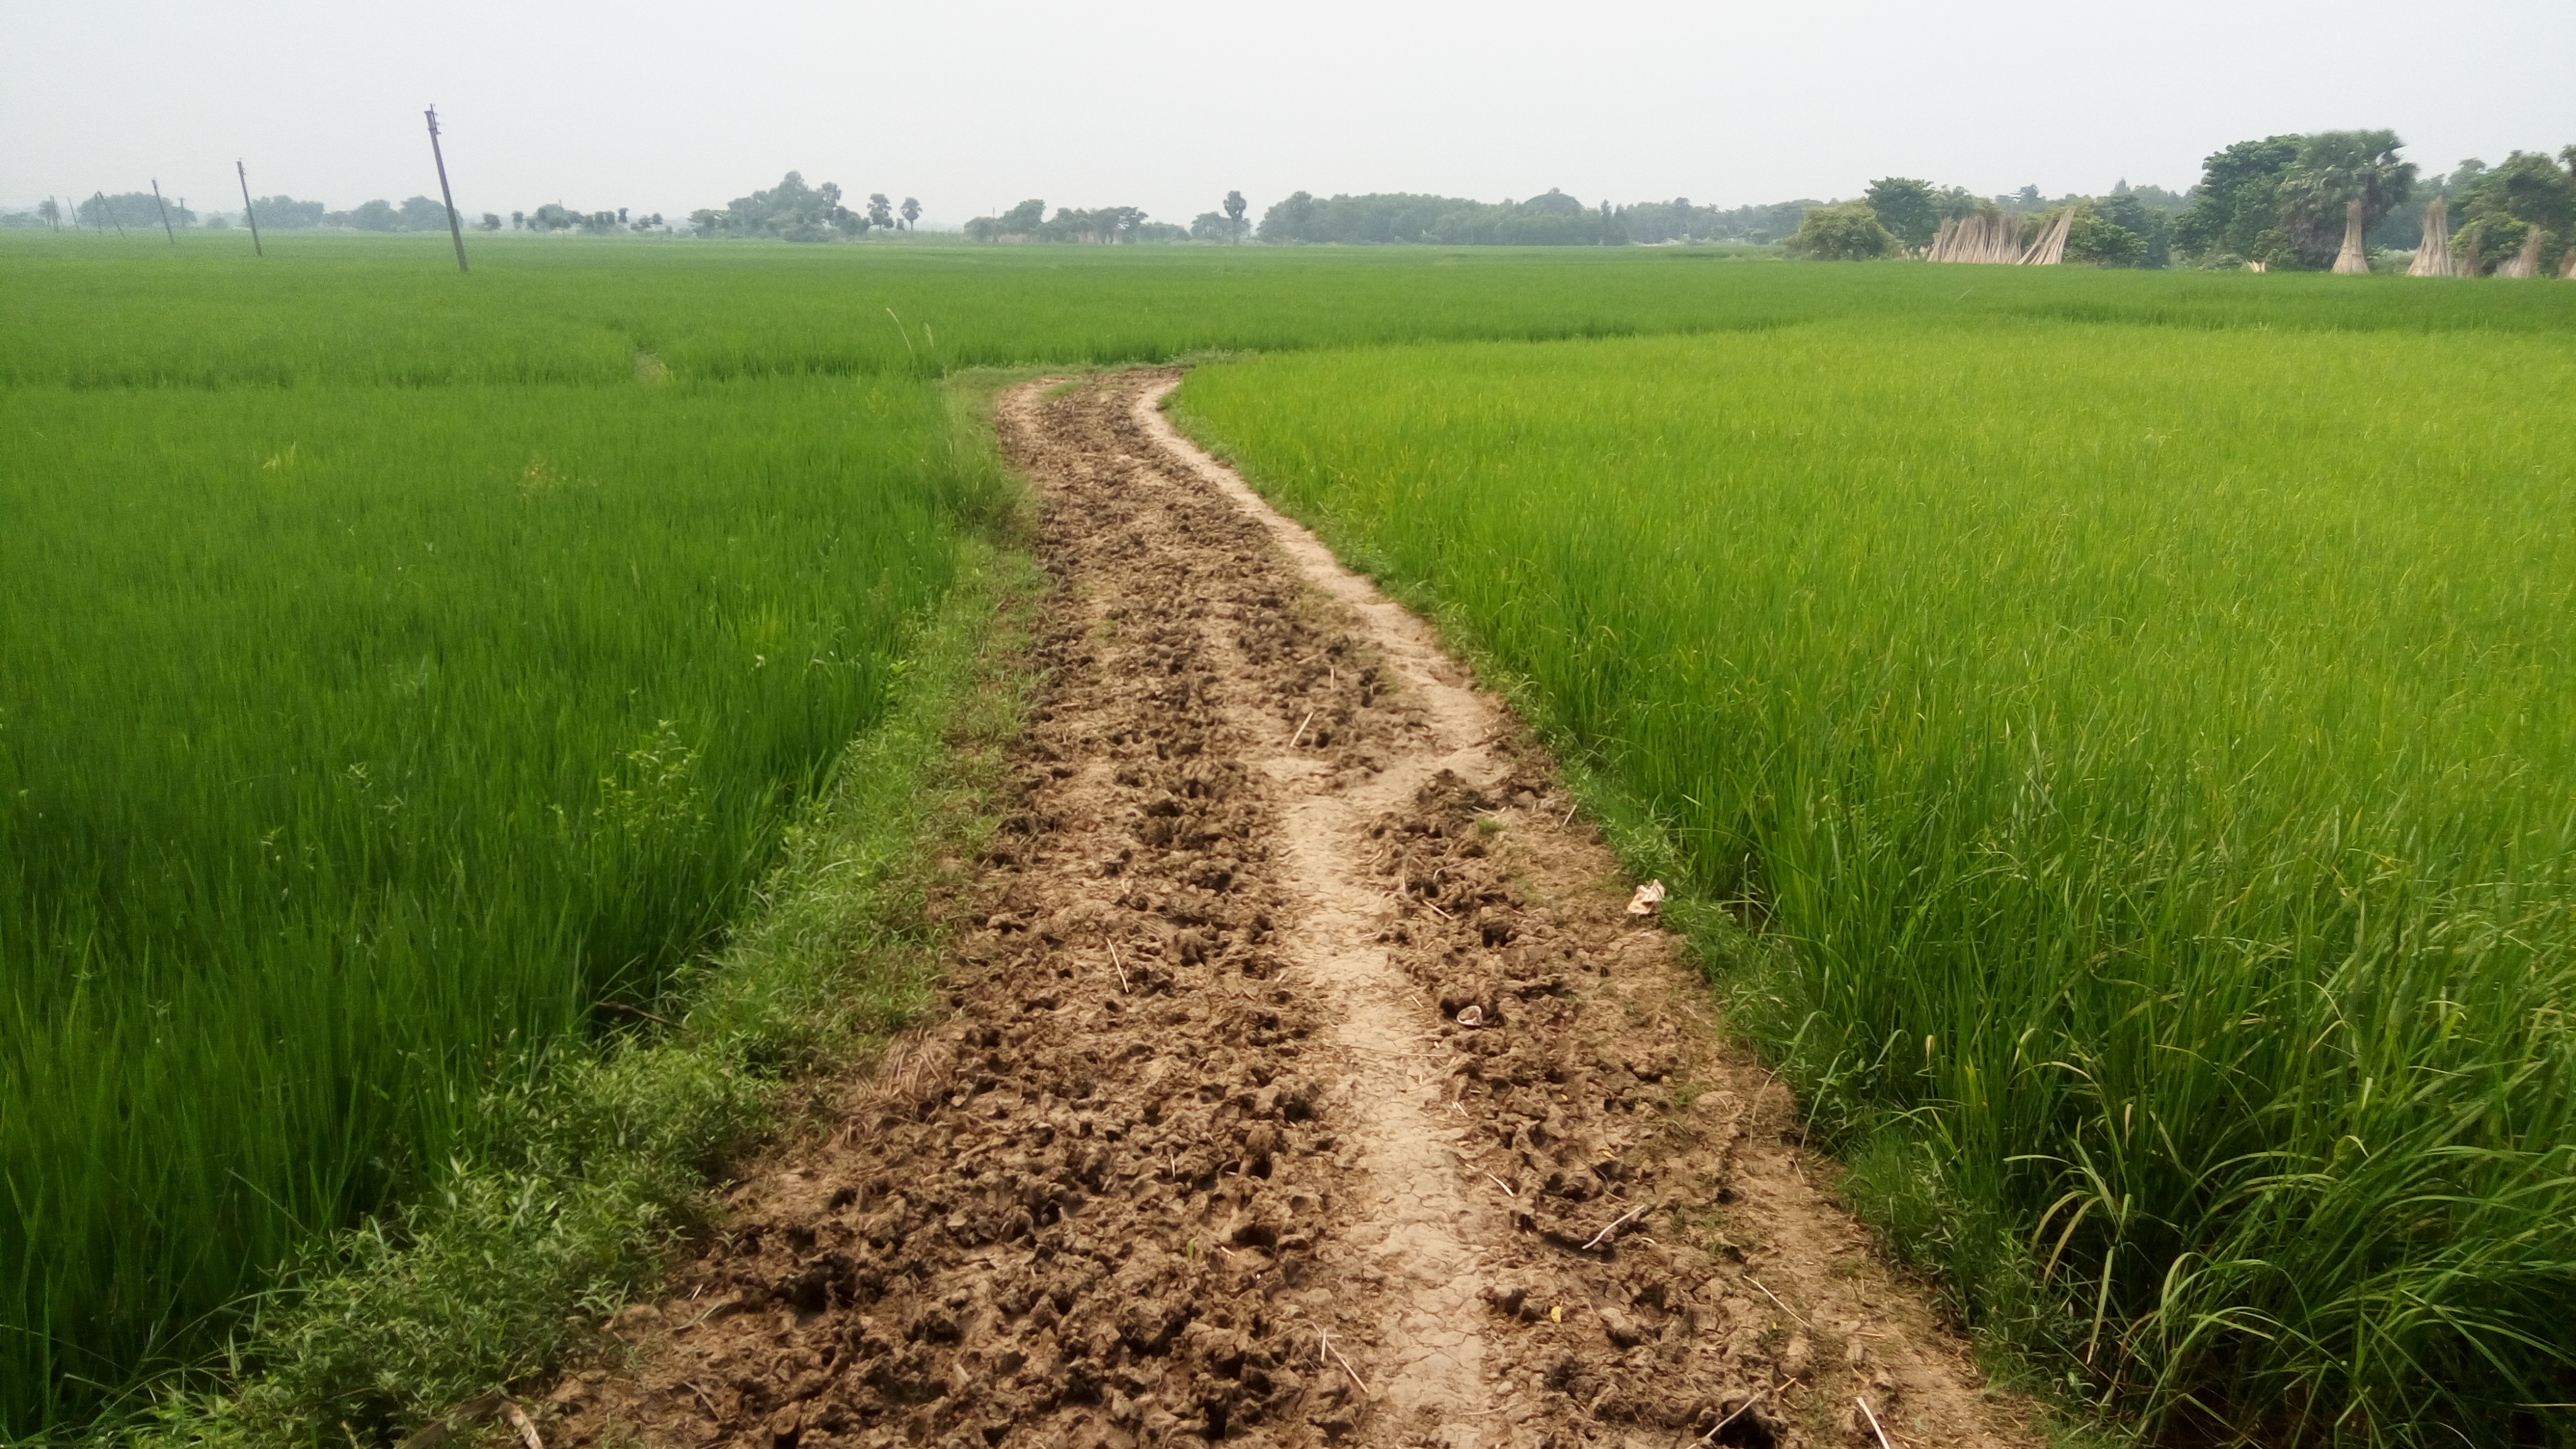 The kutcha road from the canal to the village. (Pic courtesy: Gurvinder Singh)